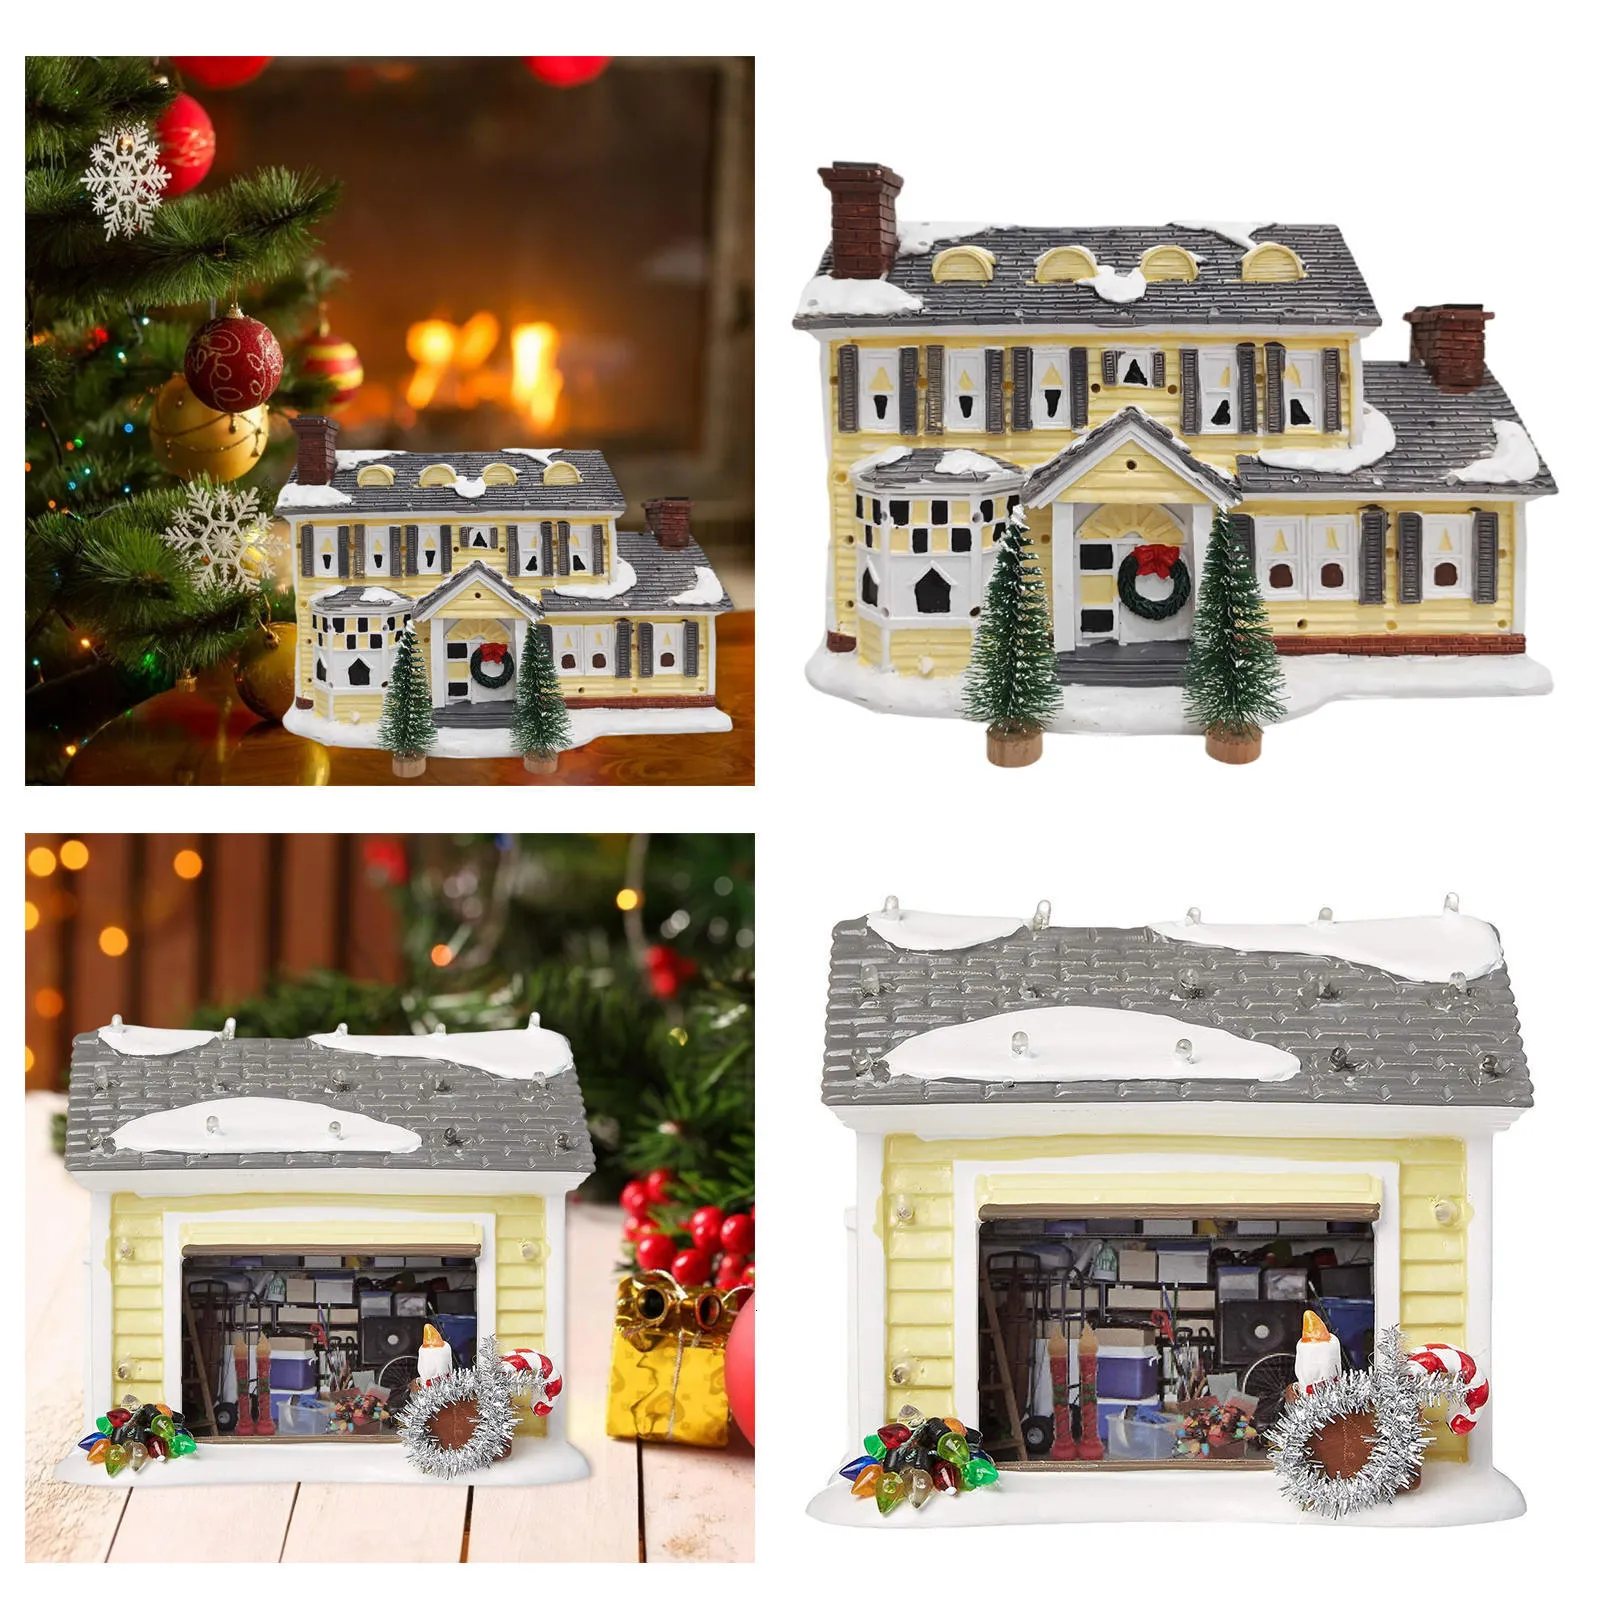 Christmas Snow Village LED Ornaments Figurine Hand Painted The Griswold Holiday House Vacation House for Home Lawn Boys Girls